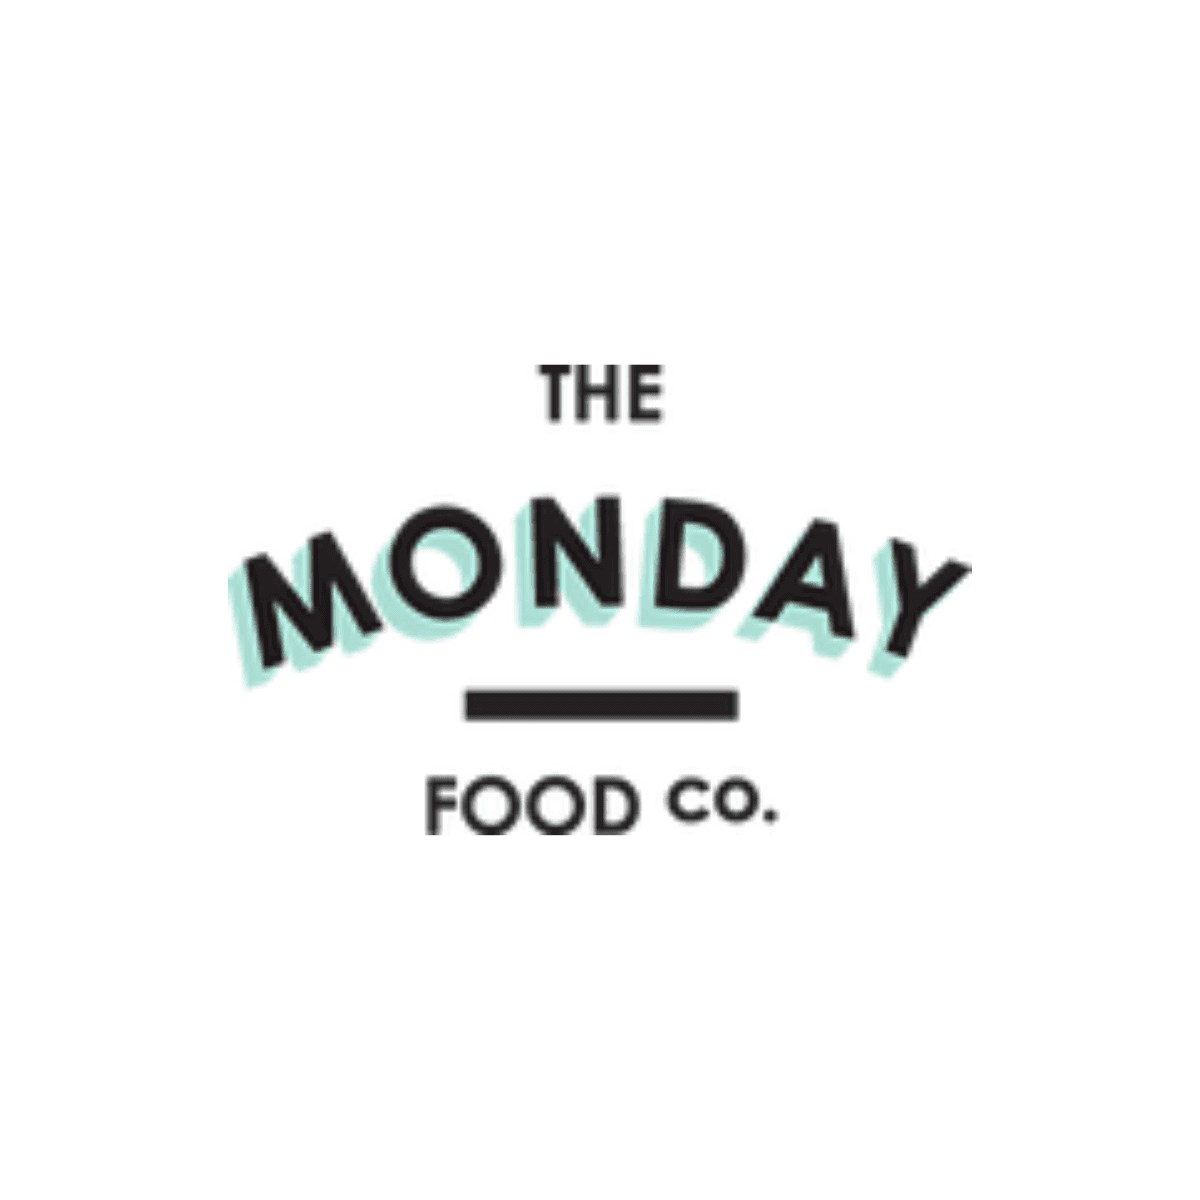 The Monday Food Co